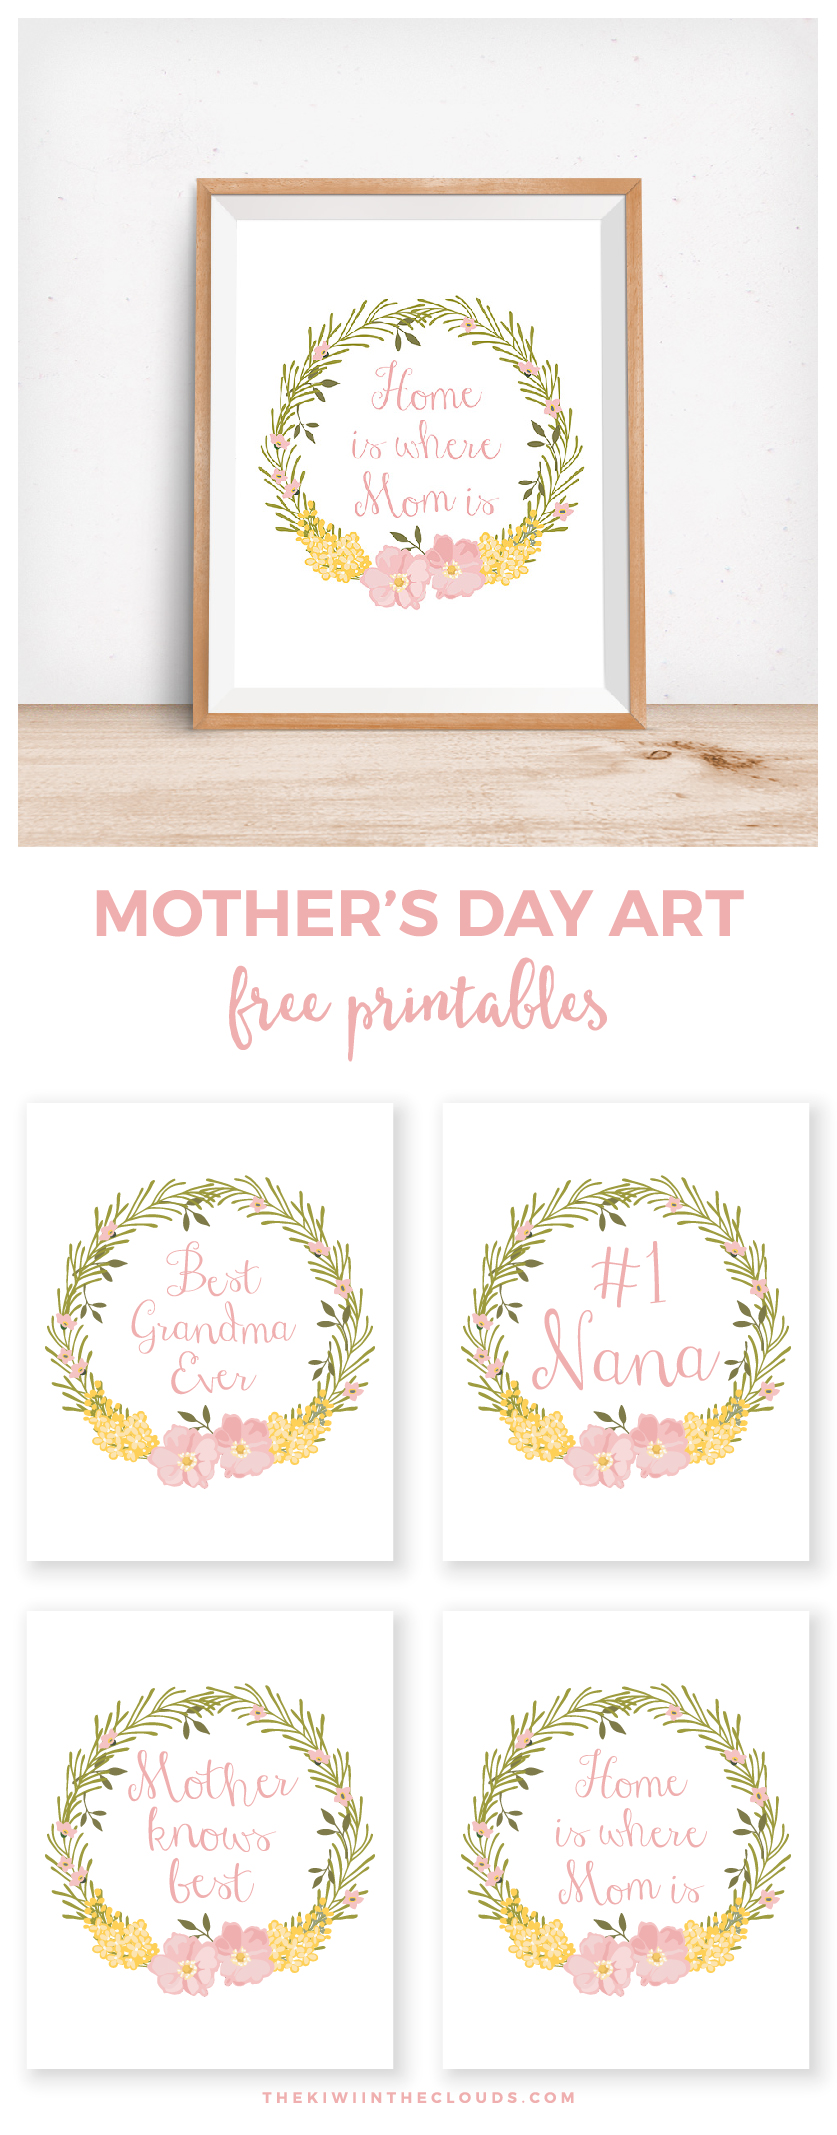 Mother's Day Free Printable Art | Click through to download 4 FREE 8x10 mother's day prints for mom, grandma and nana!